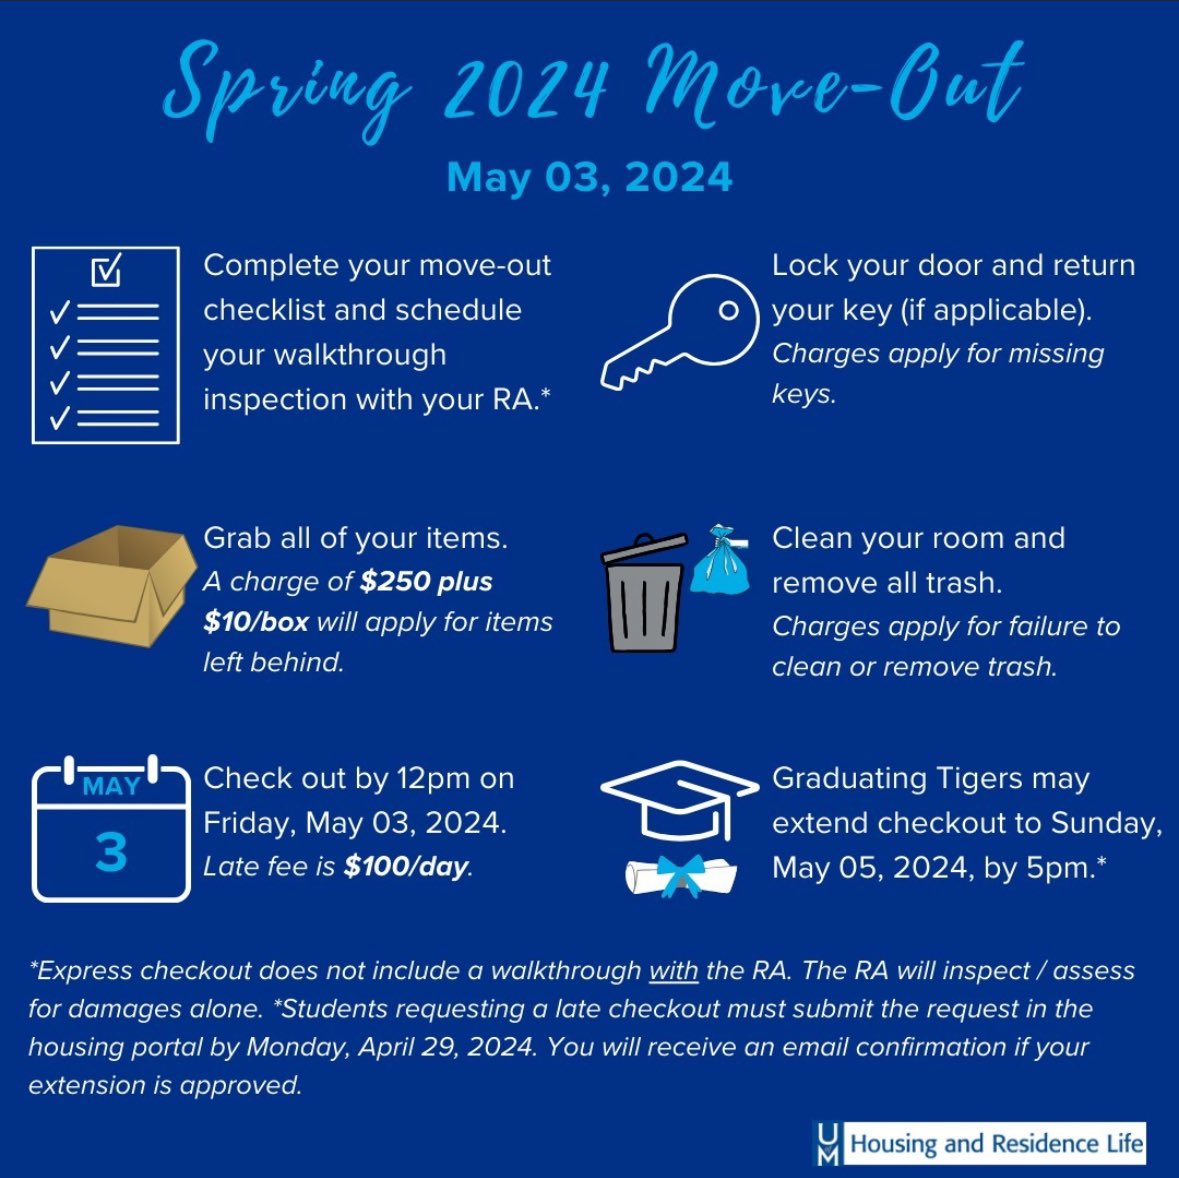 🐯SPRING ‘24 MOVE OUT🐯 Be sure to monitor your University communication for any updates and plan accordingly. You must check out by Friday, May 3rd. For late checkout, you must submit a request in the housing portal by Monday, April 29th. Questions? Contact your RA or RLC!